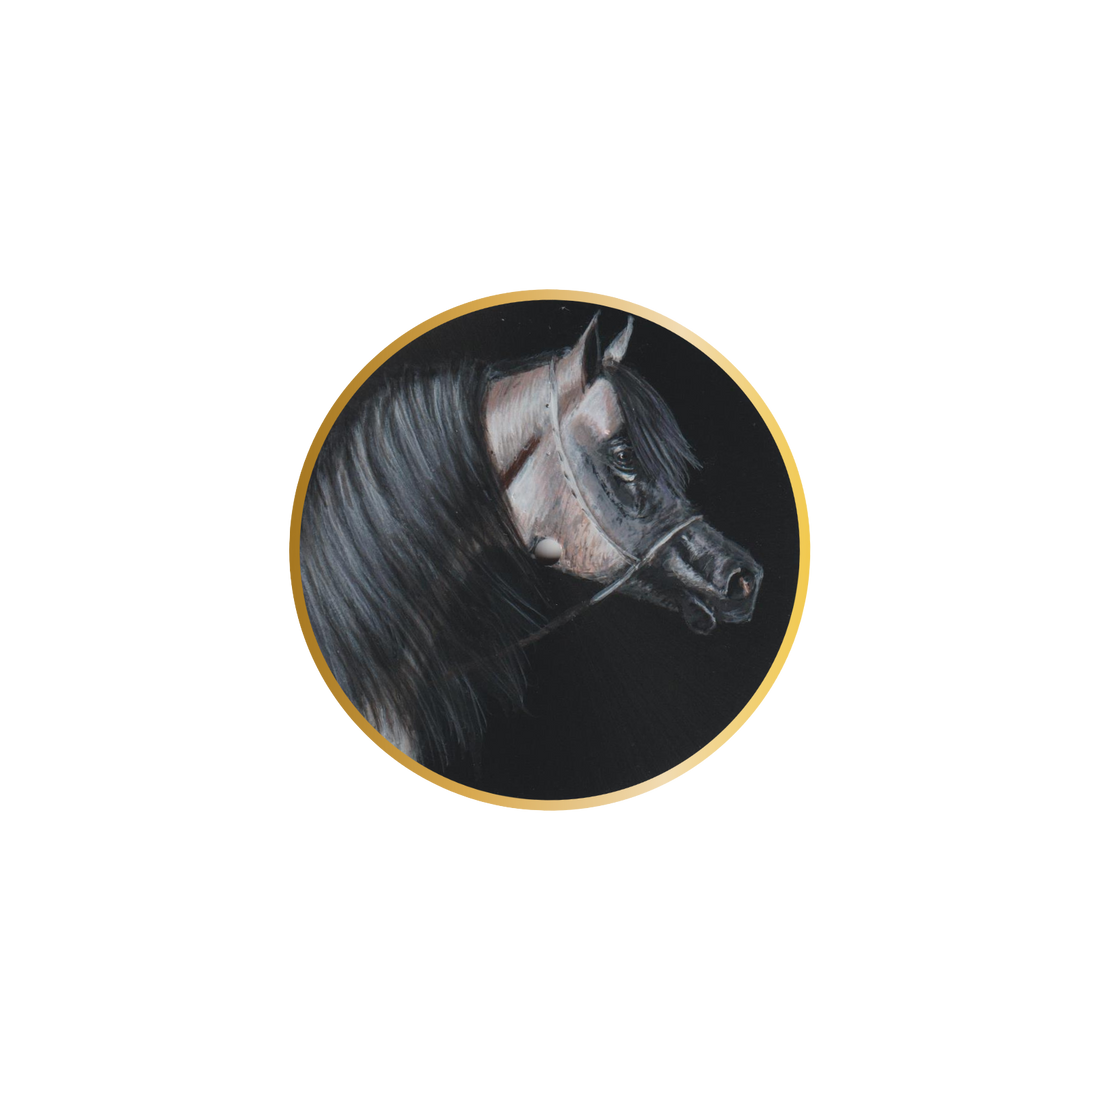 A luxurious hand-painted wristwatch named 'Silver Moon' by B360 Watch. The watch features a stunning depiction of a grey Arabian horse with flowing black hair, capturing the essence of elegance and artistry. The dial showcases the majestic beauty of the horse against a backdrop reminiscent of a moonlit night. A masterpiece that exudes uniqueness and sophistication, embodying the spirit of a true champion."